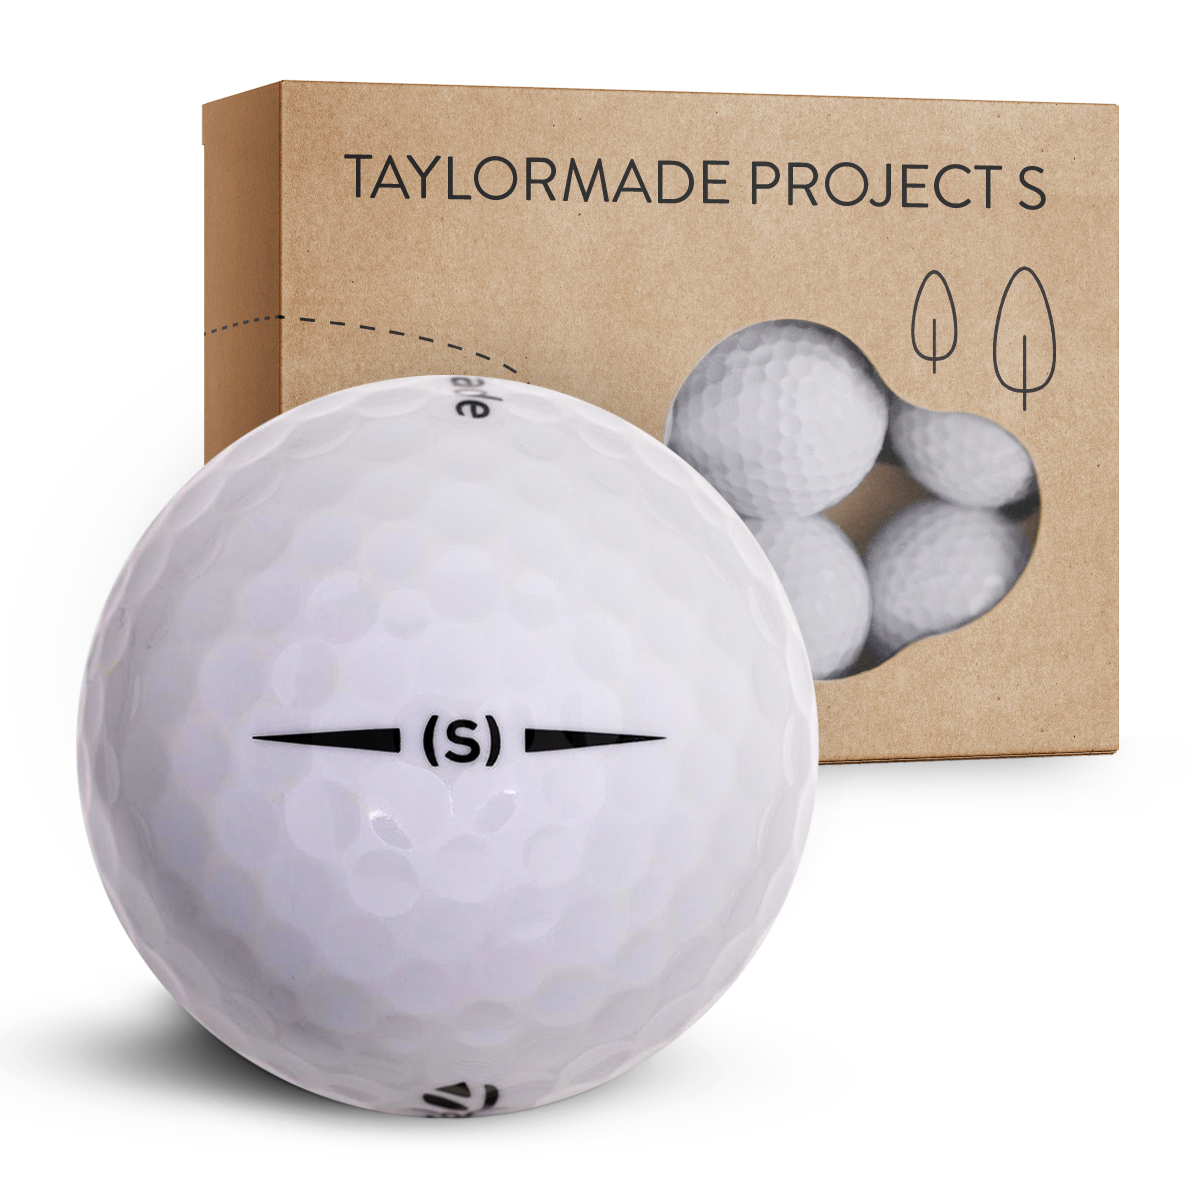 TaylorMade Project (s)